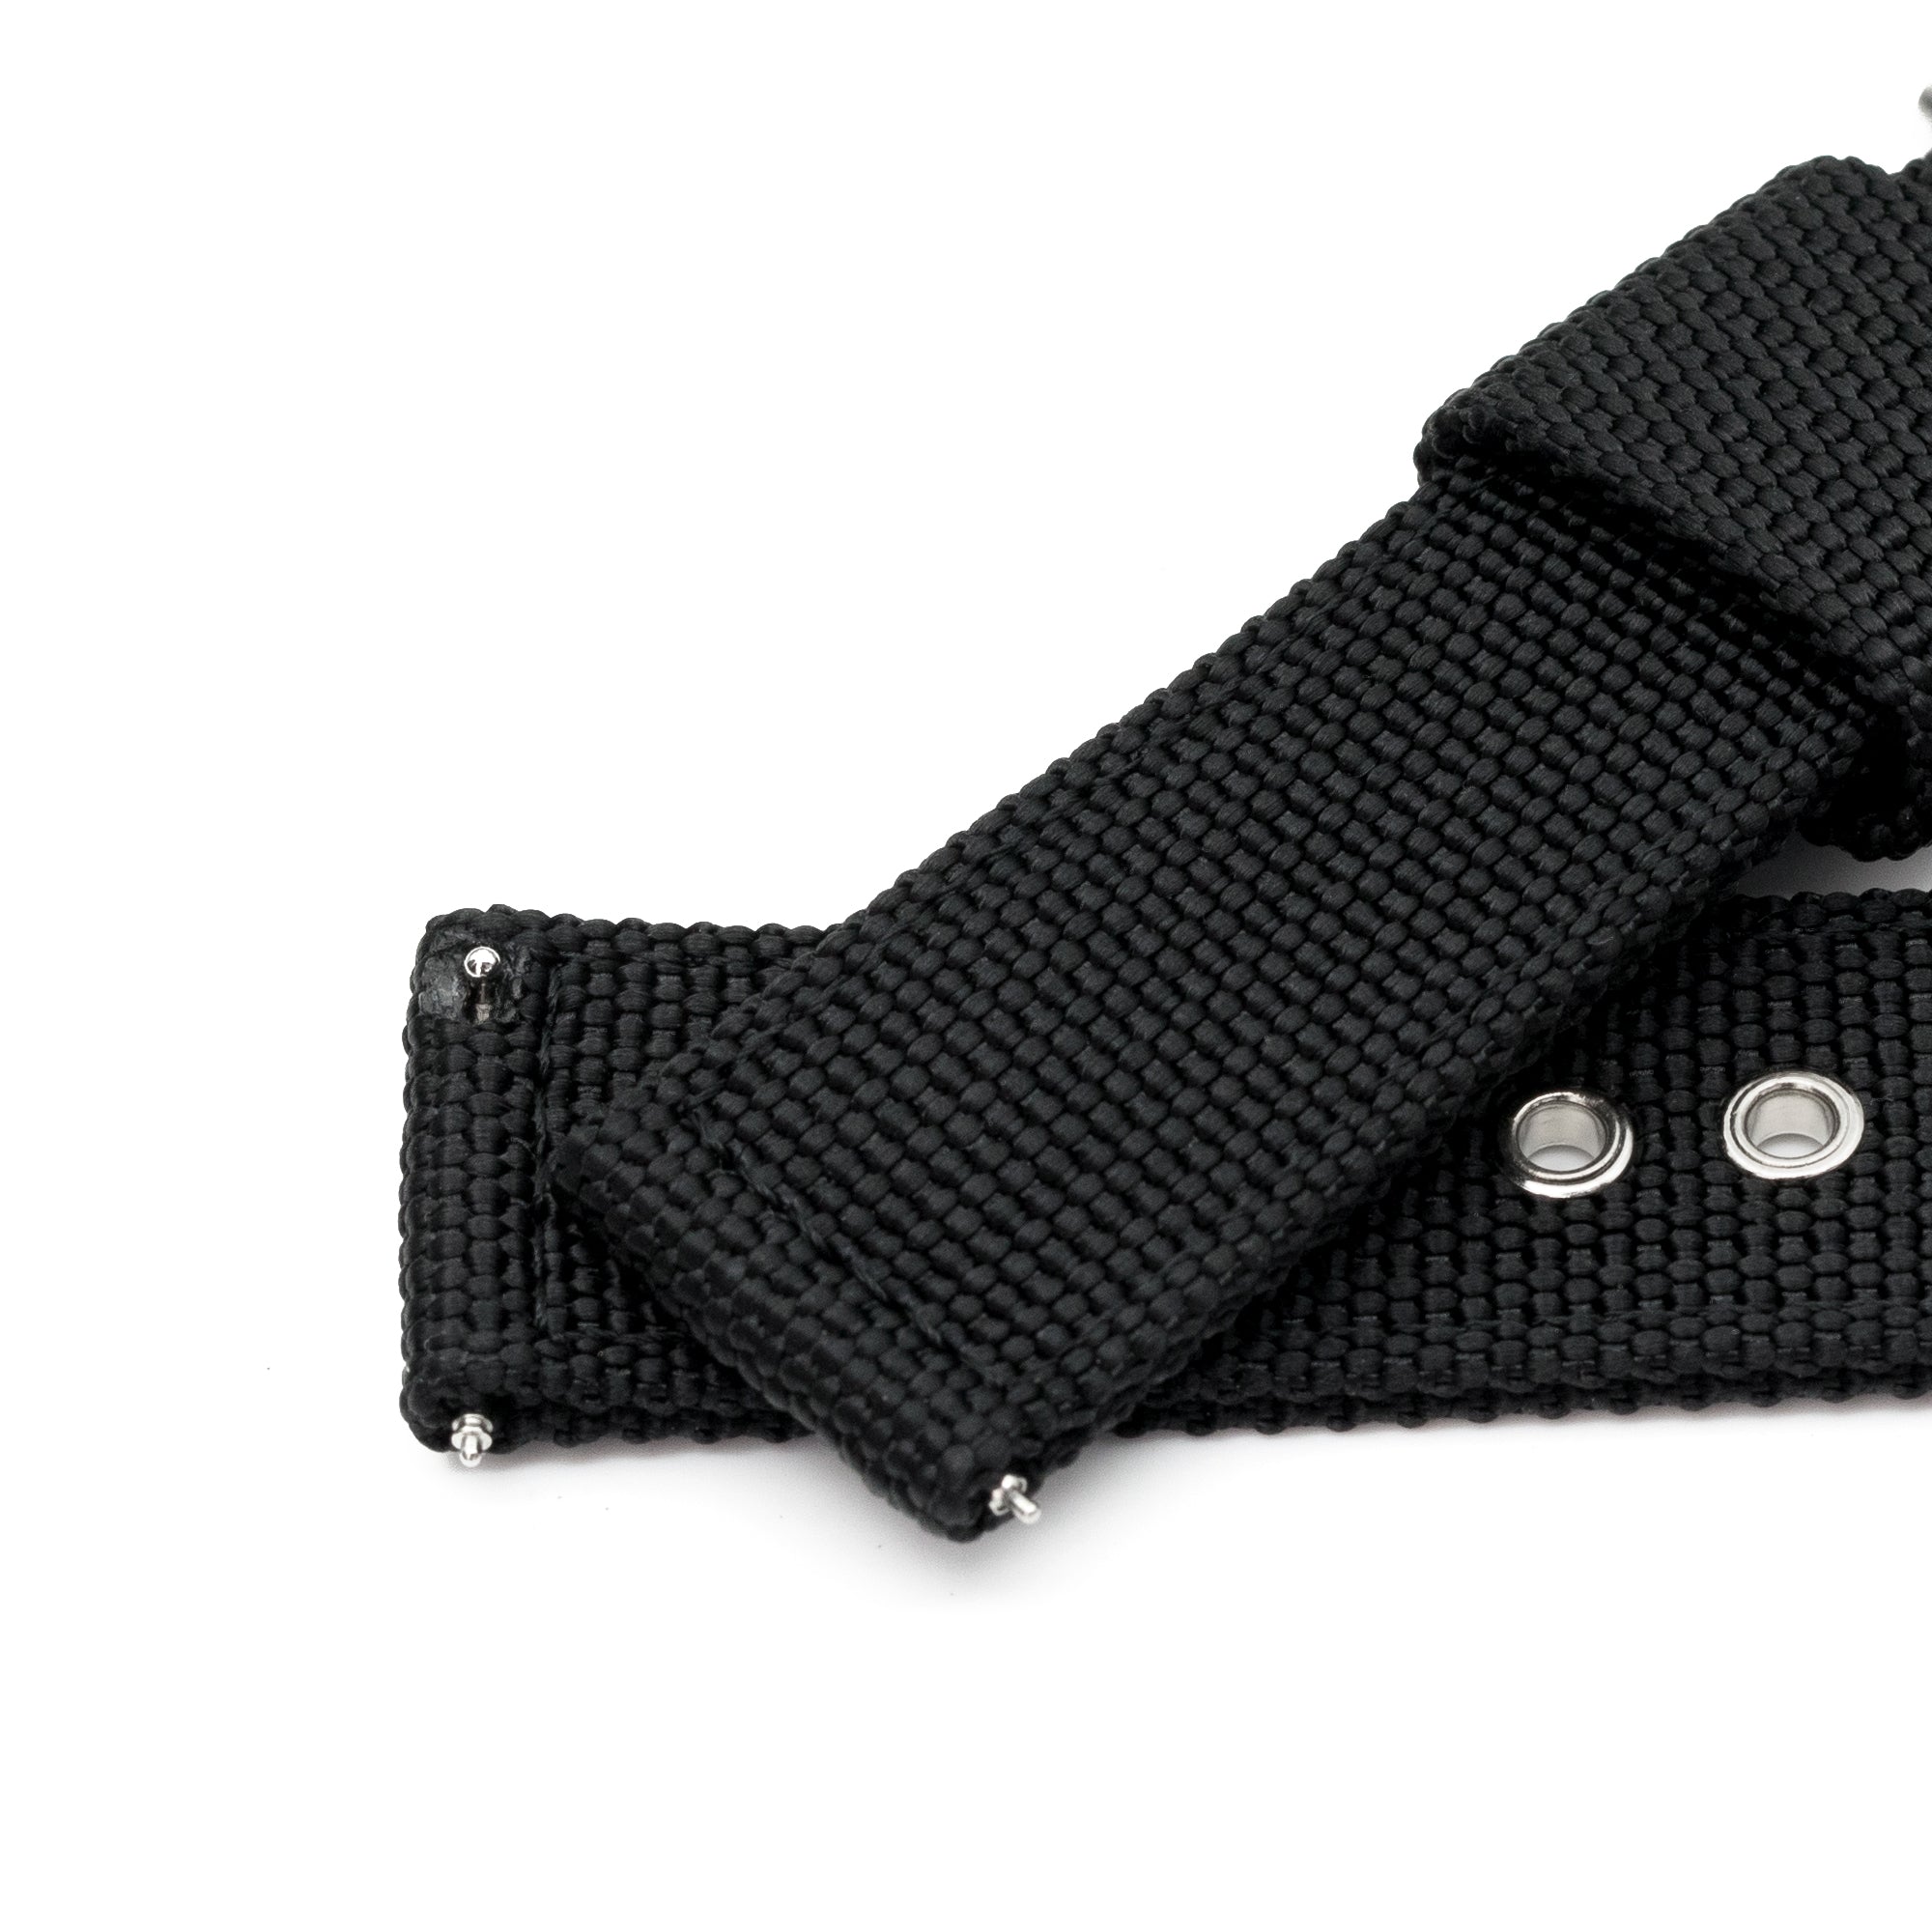 Black Premium Nylon Weaved Quick Release Watch Band with Eyelet Strapcode Watch Bands